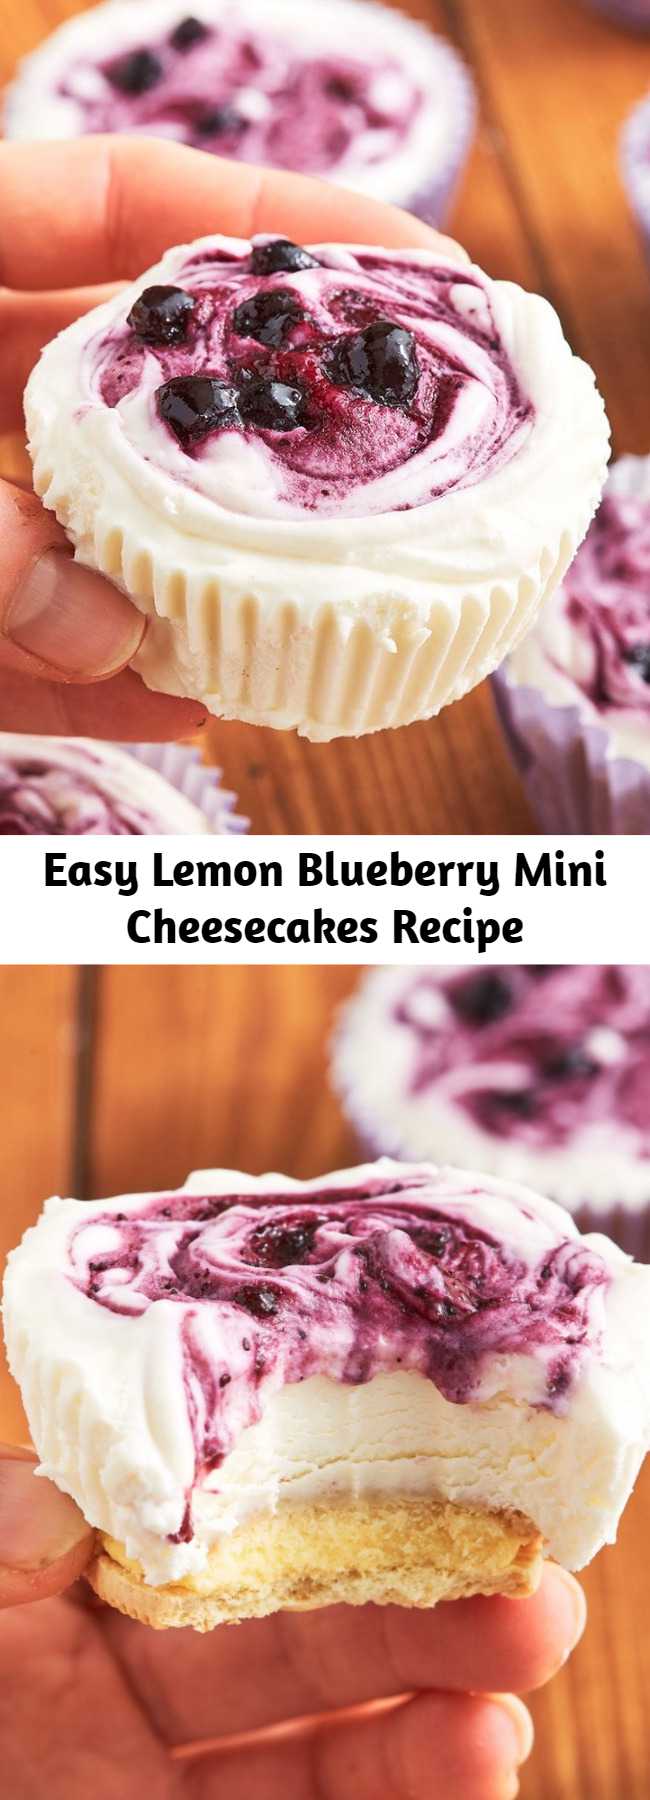 Easy Lemon Blueberry Mini Cheesecakes Recipe - These Lemon Blueberry Mini Cheesecakes are the perfect tiny dessert to satisfy your sweet tooth without going overboard. Sweet blueberry jam and tart lemon go together perfectly in these cheesecakes Mini cheesecakes, MASSIVE flavor. #lemon #blueberry #lemonblueberry #cheesecakes #minidesserts #cheesecakedesserts #partydesserts